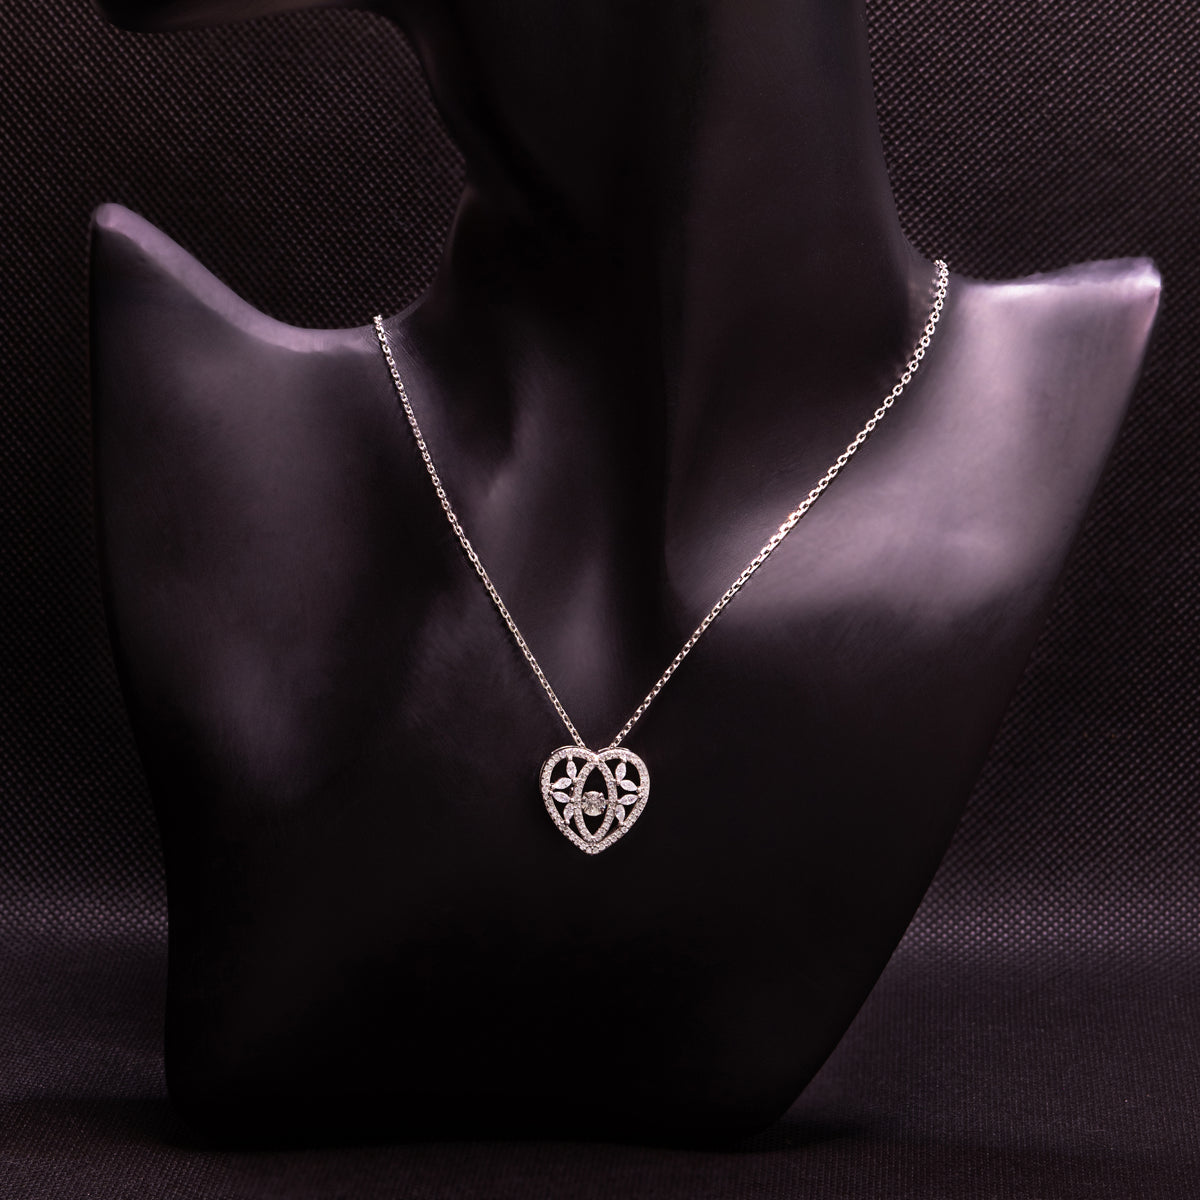 Dancing Heart Pendant with Link Chain